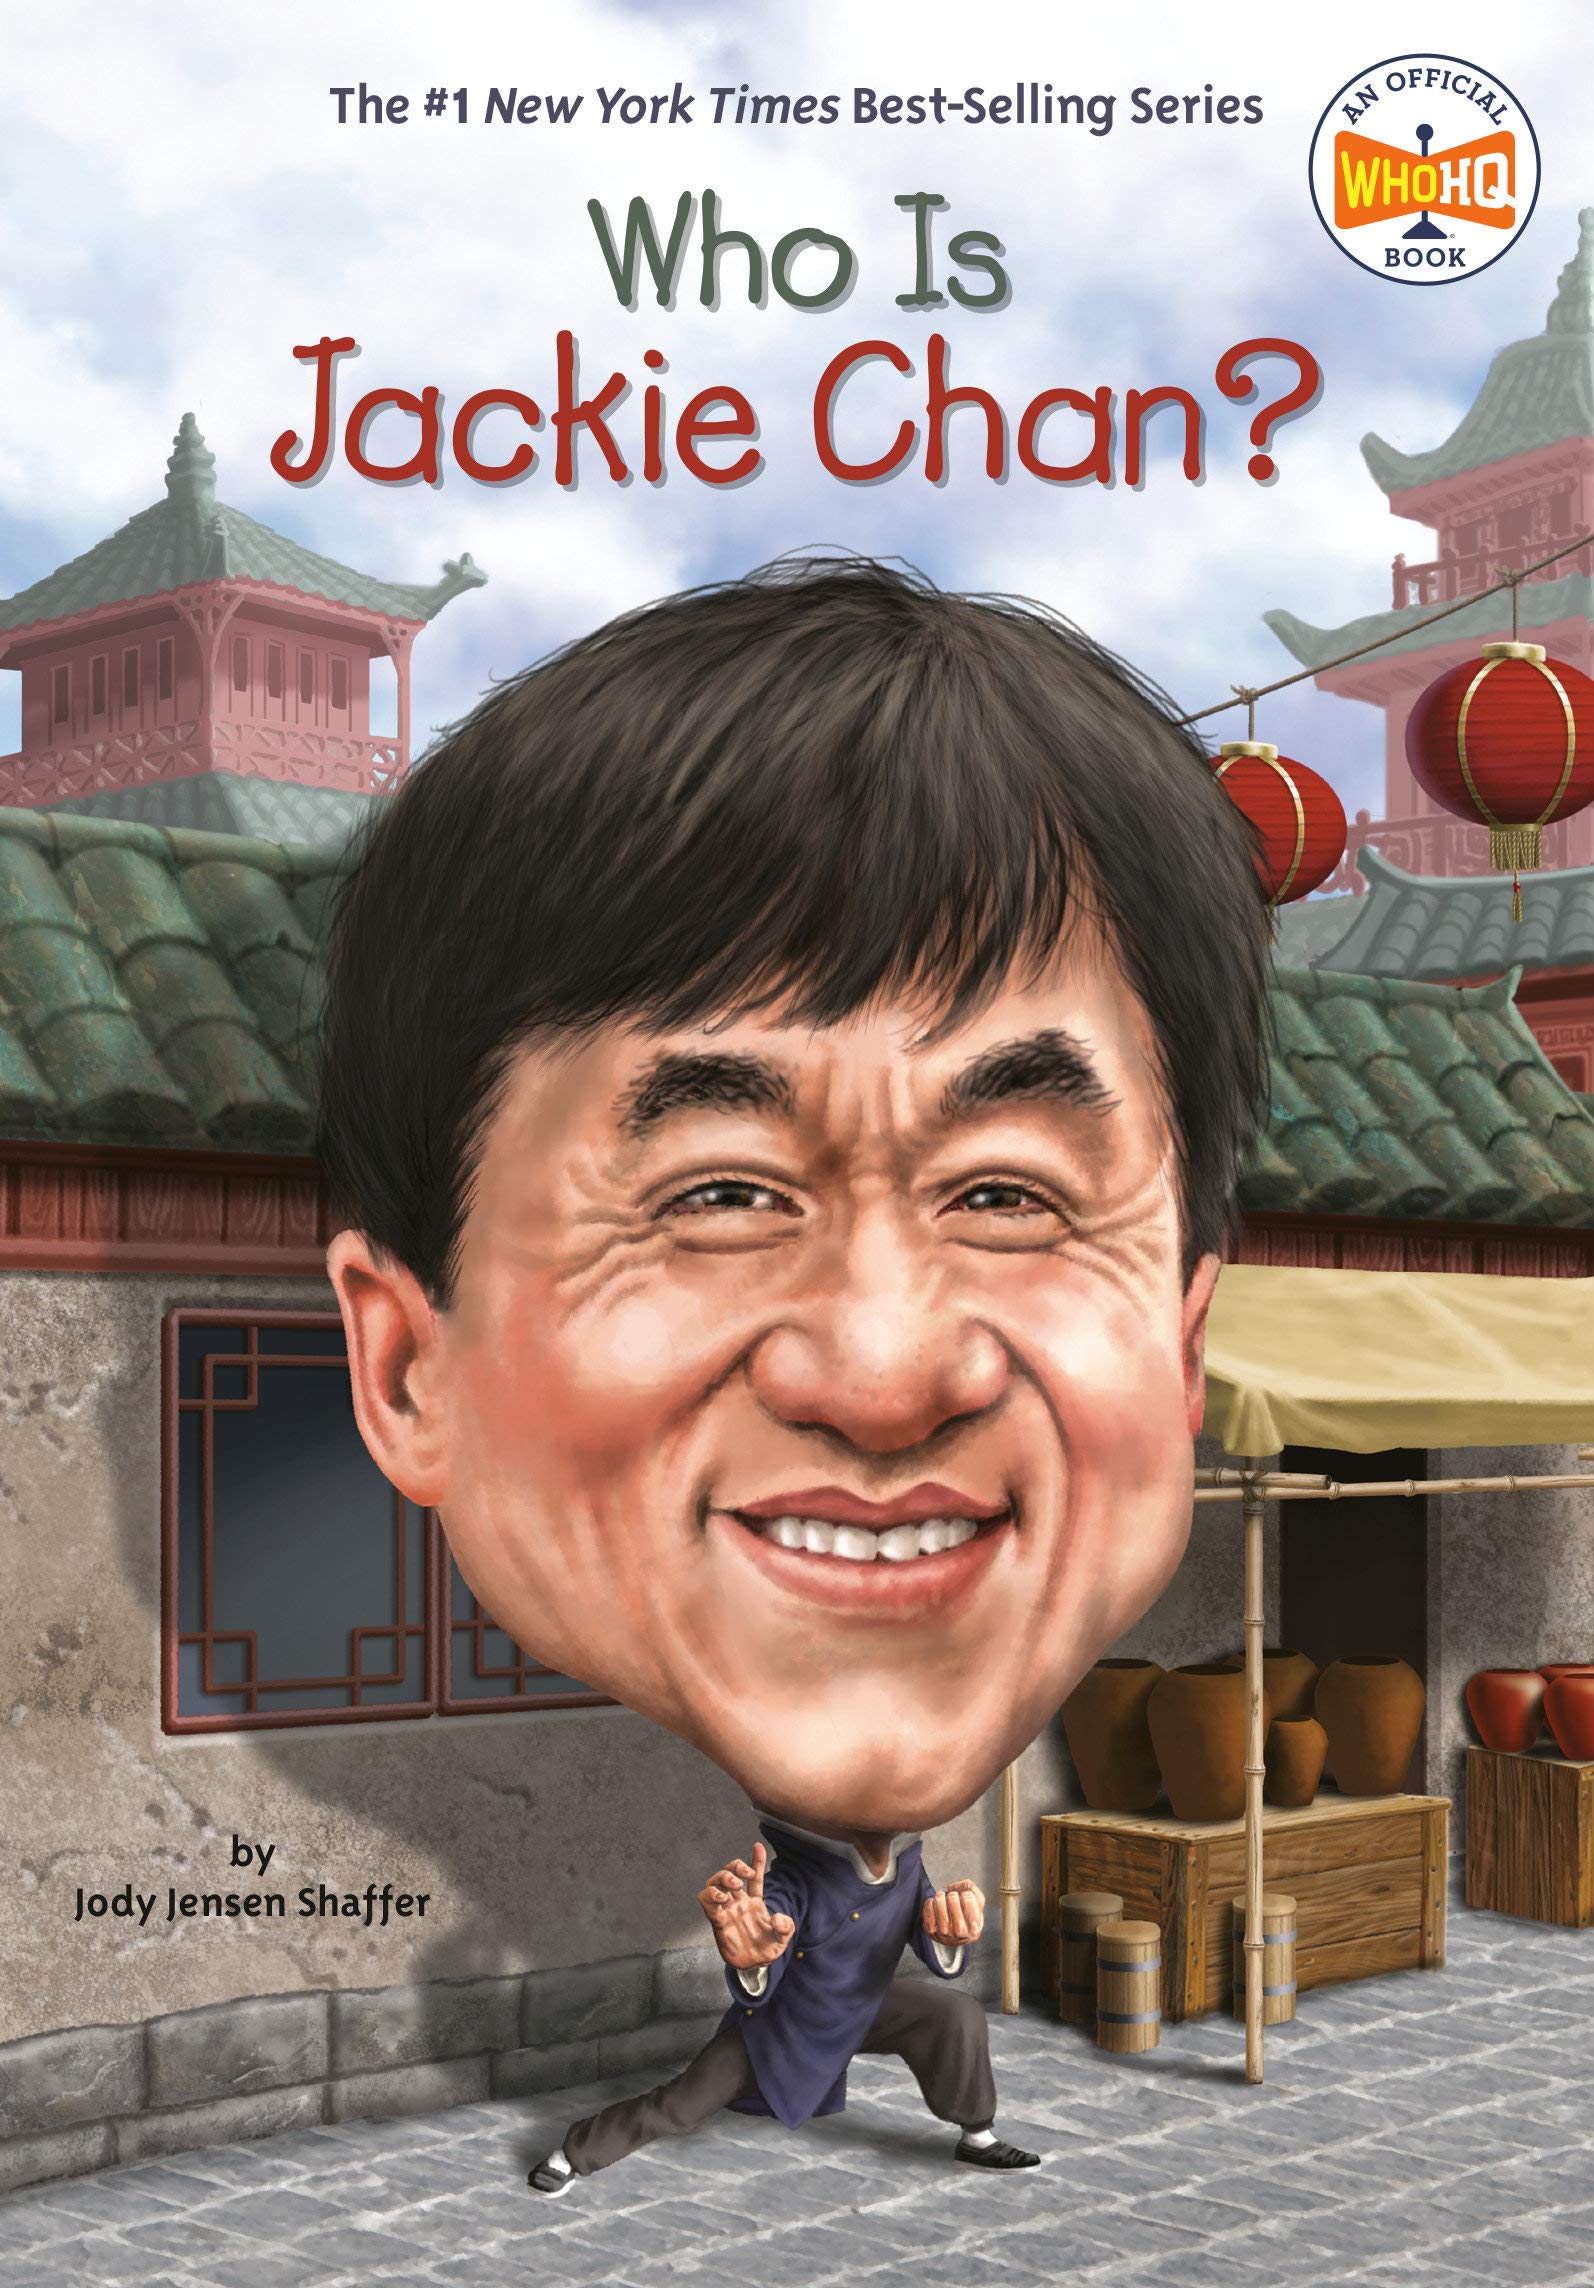 Who is Jackie Chan?